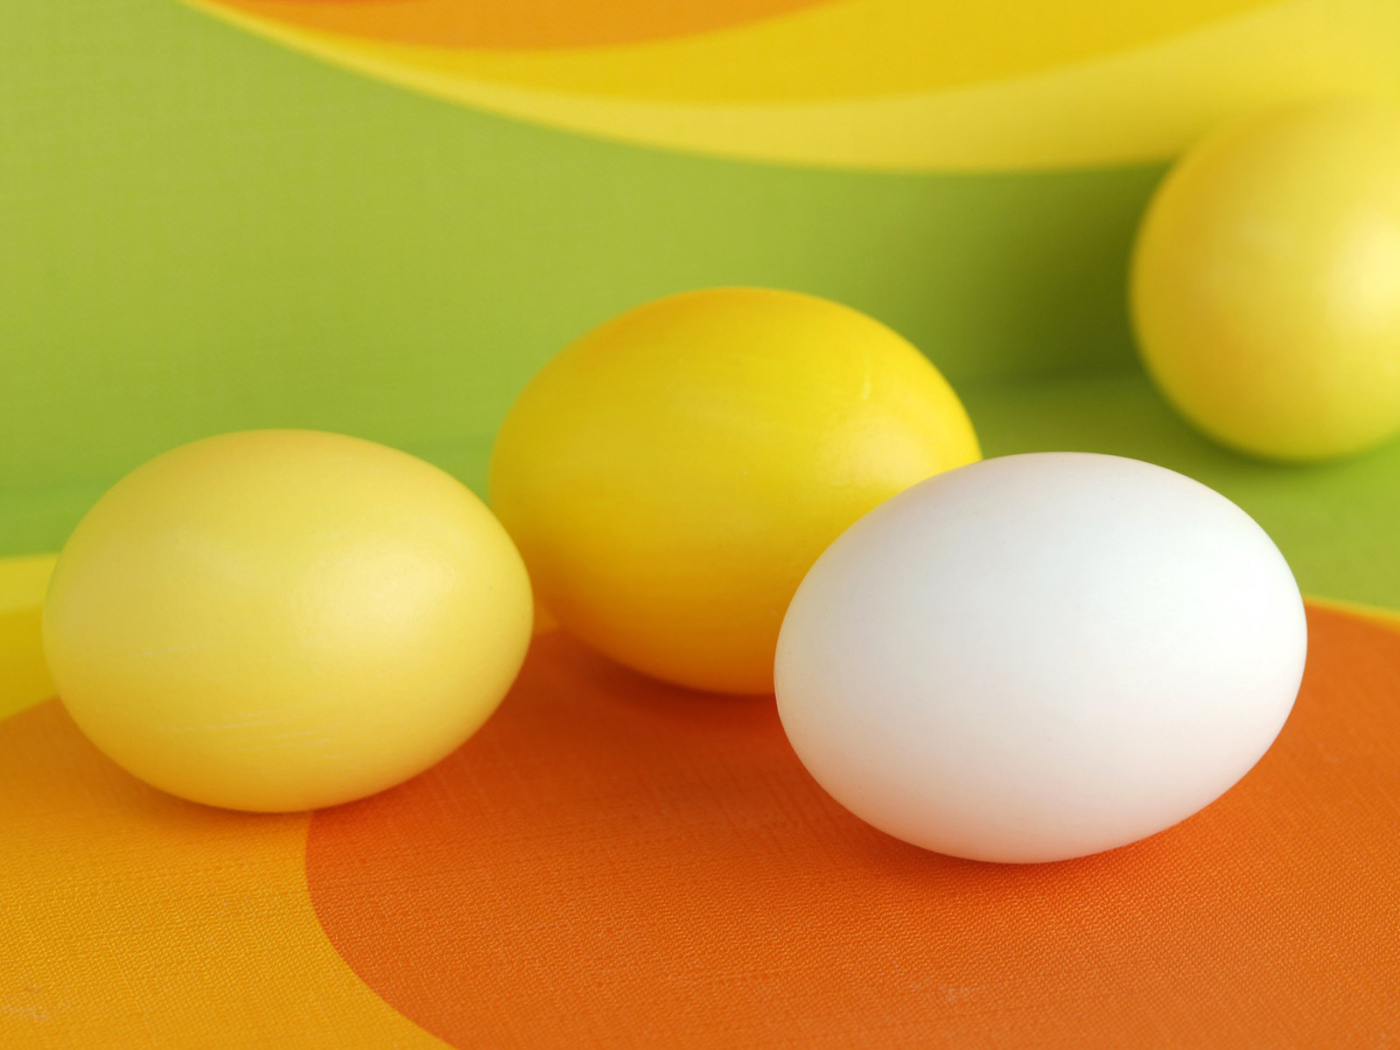 Yellow and white egg for Easter